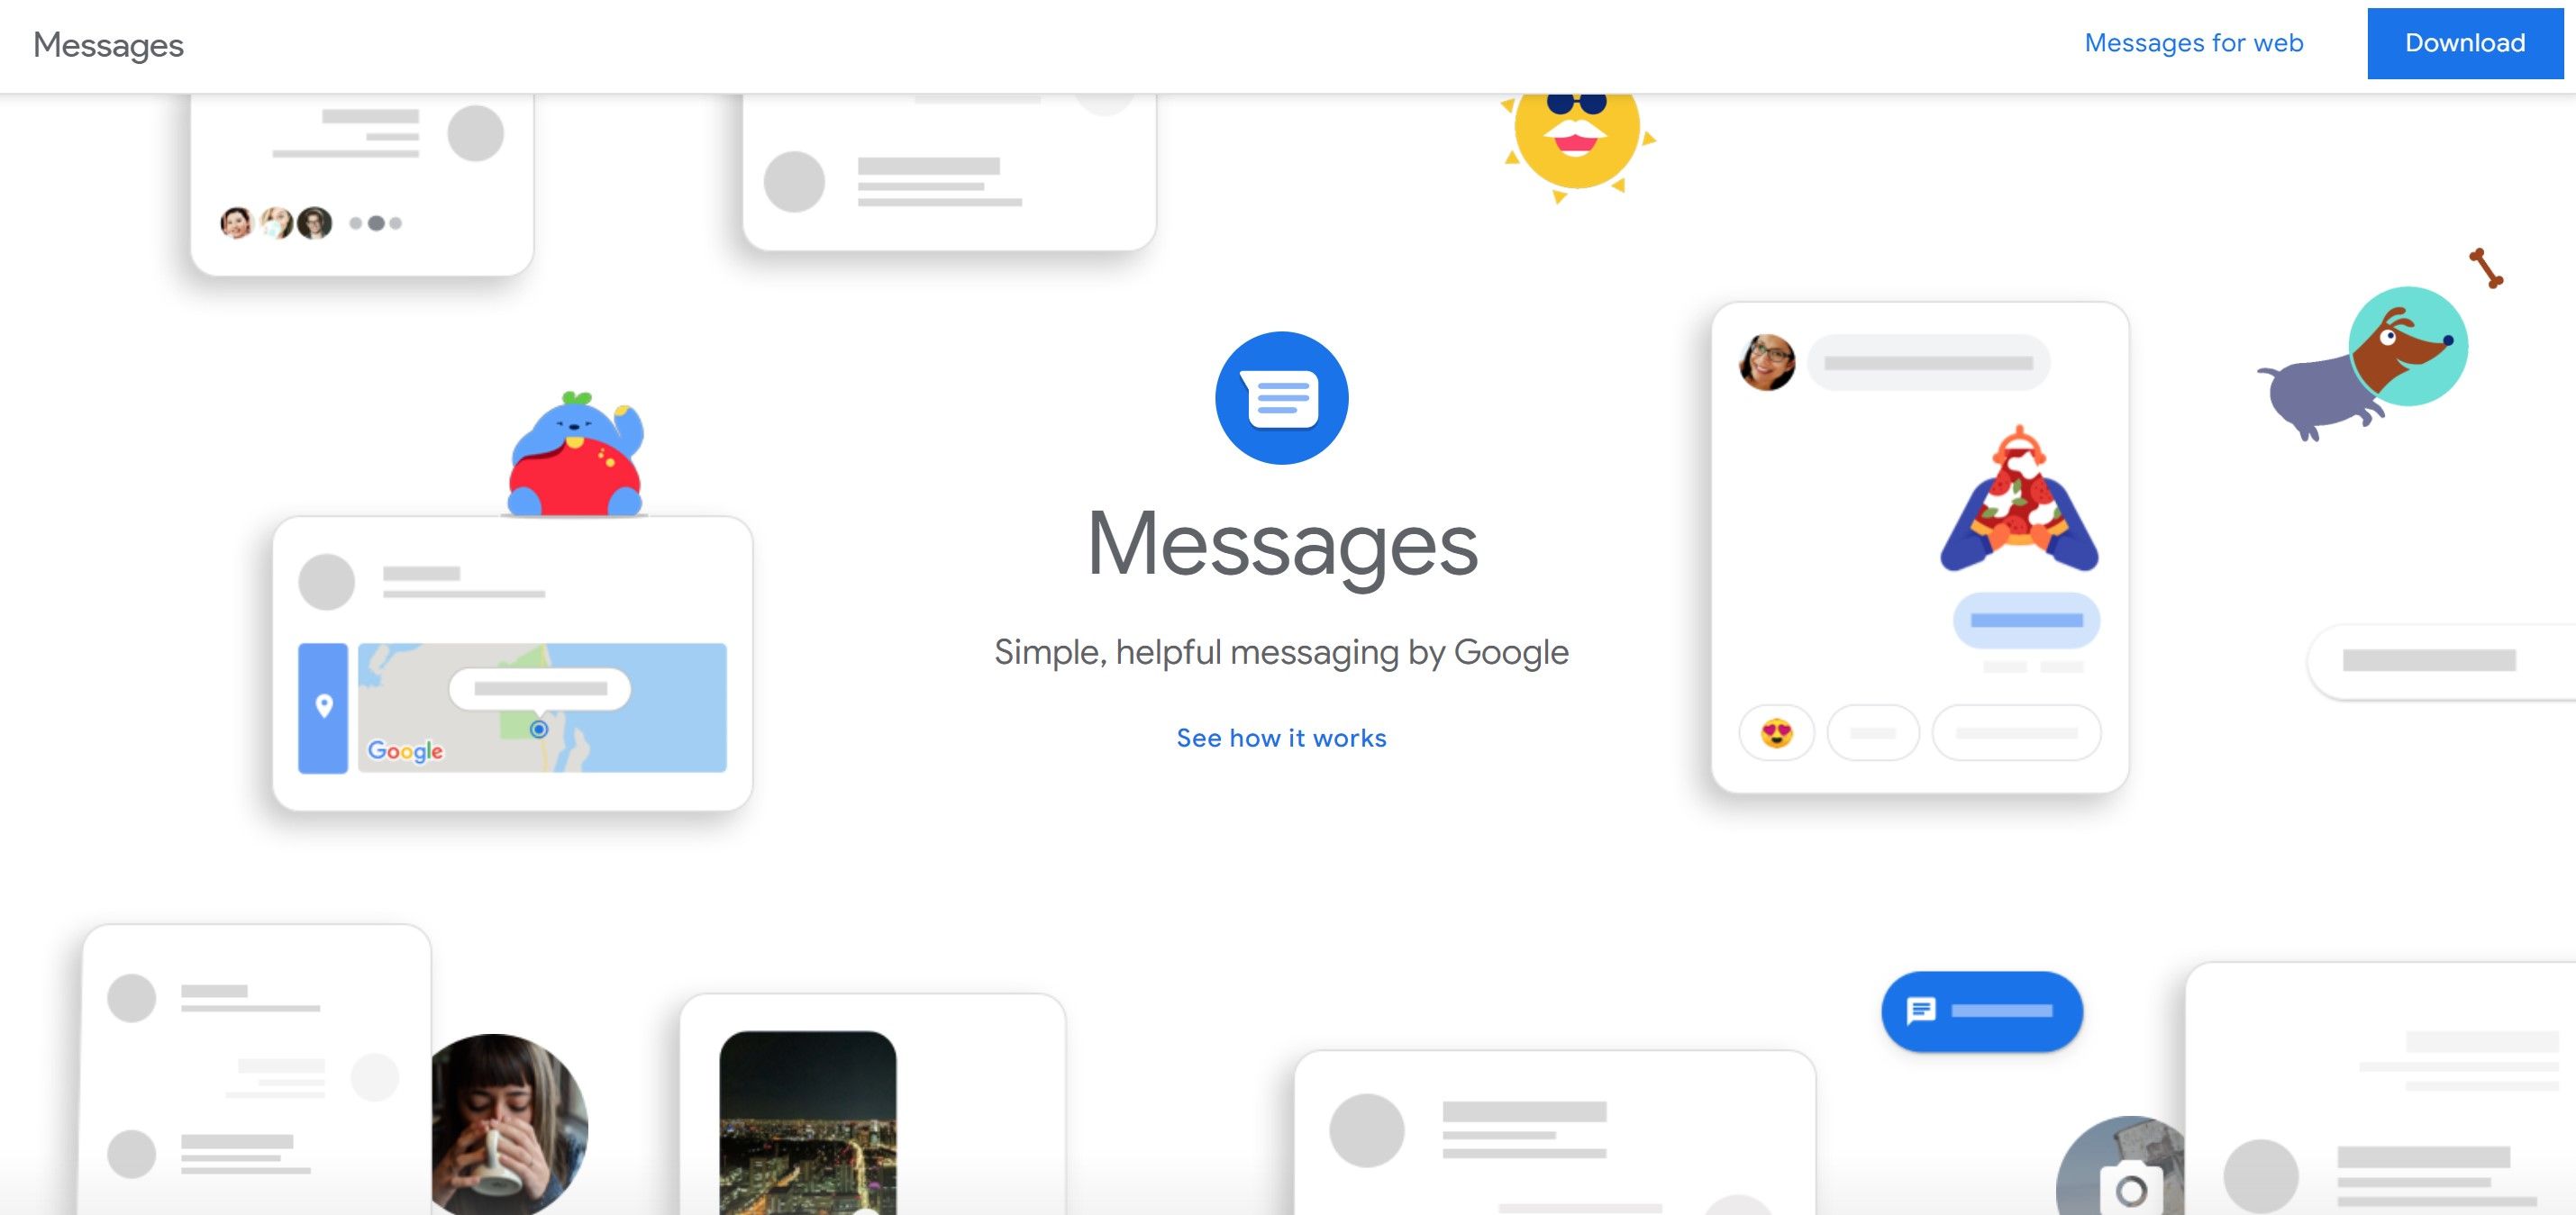 Google Messages web home page